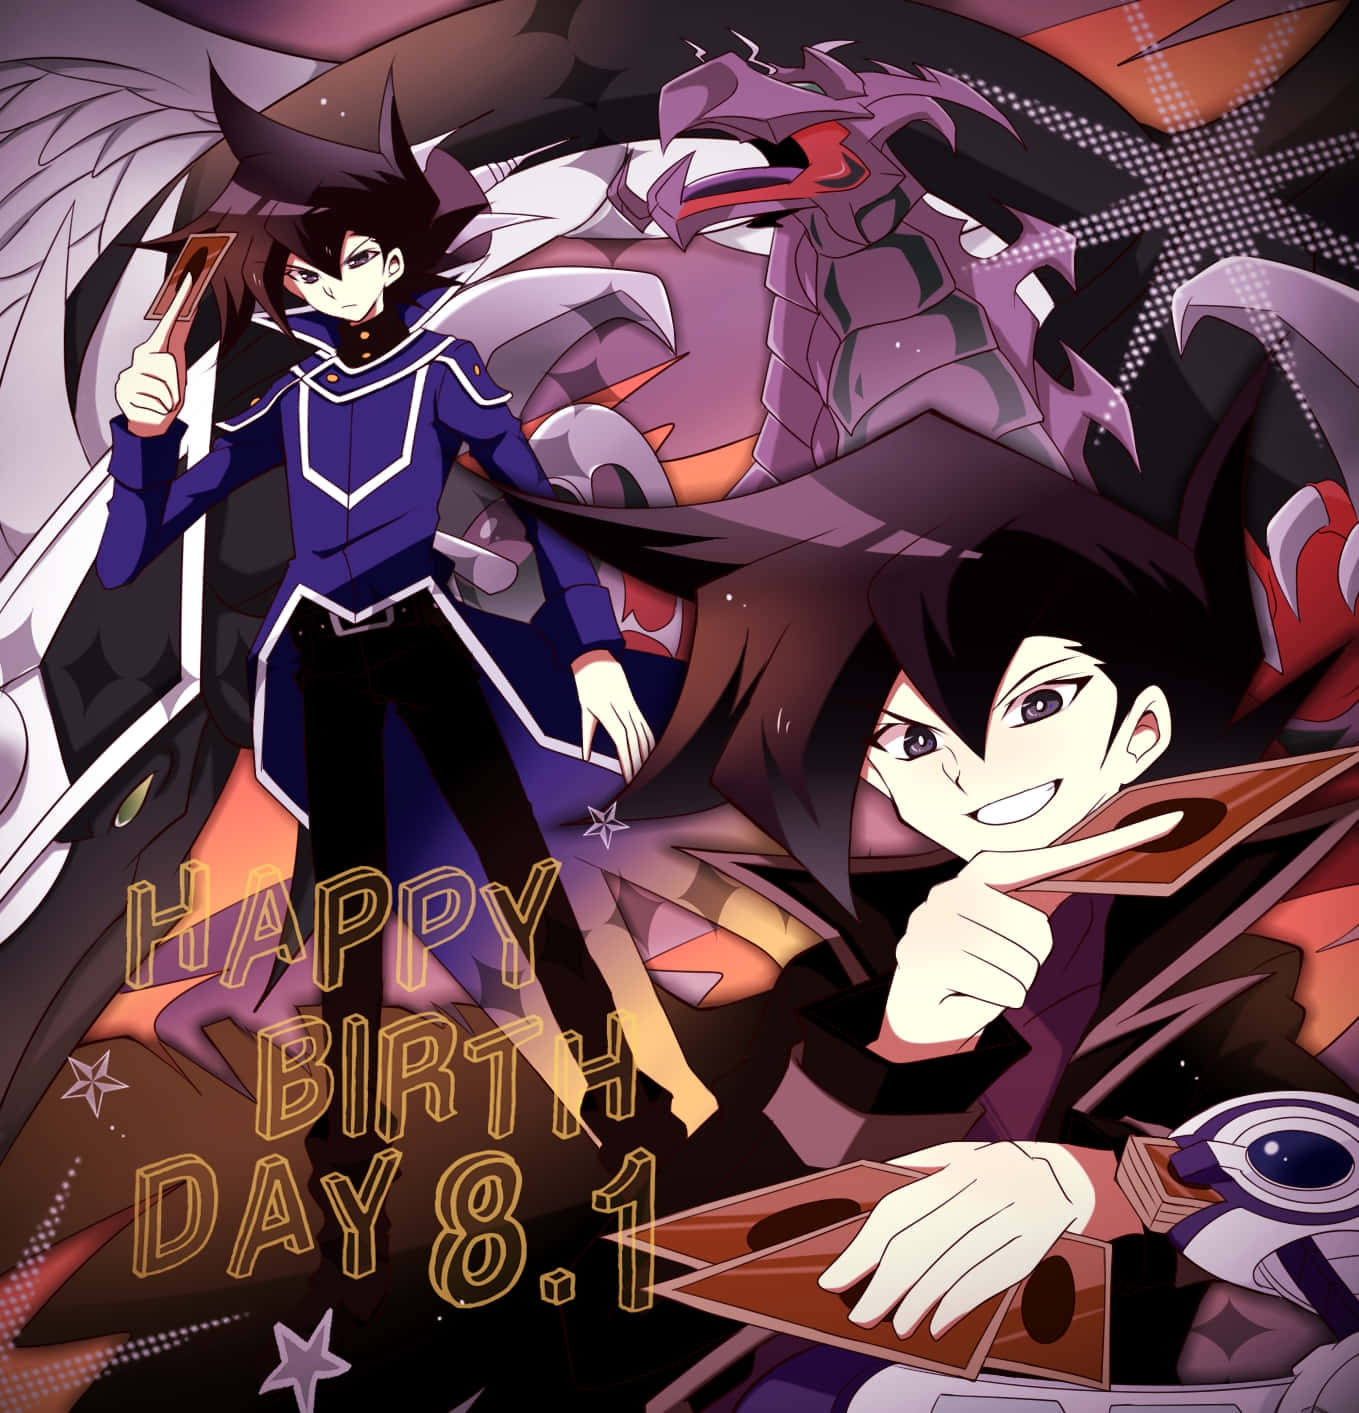 Chazz Princeton posing with a Duel Monster card Wallpaper